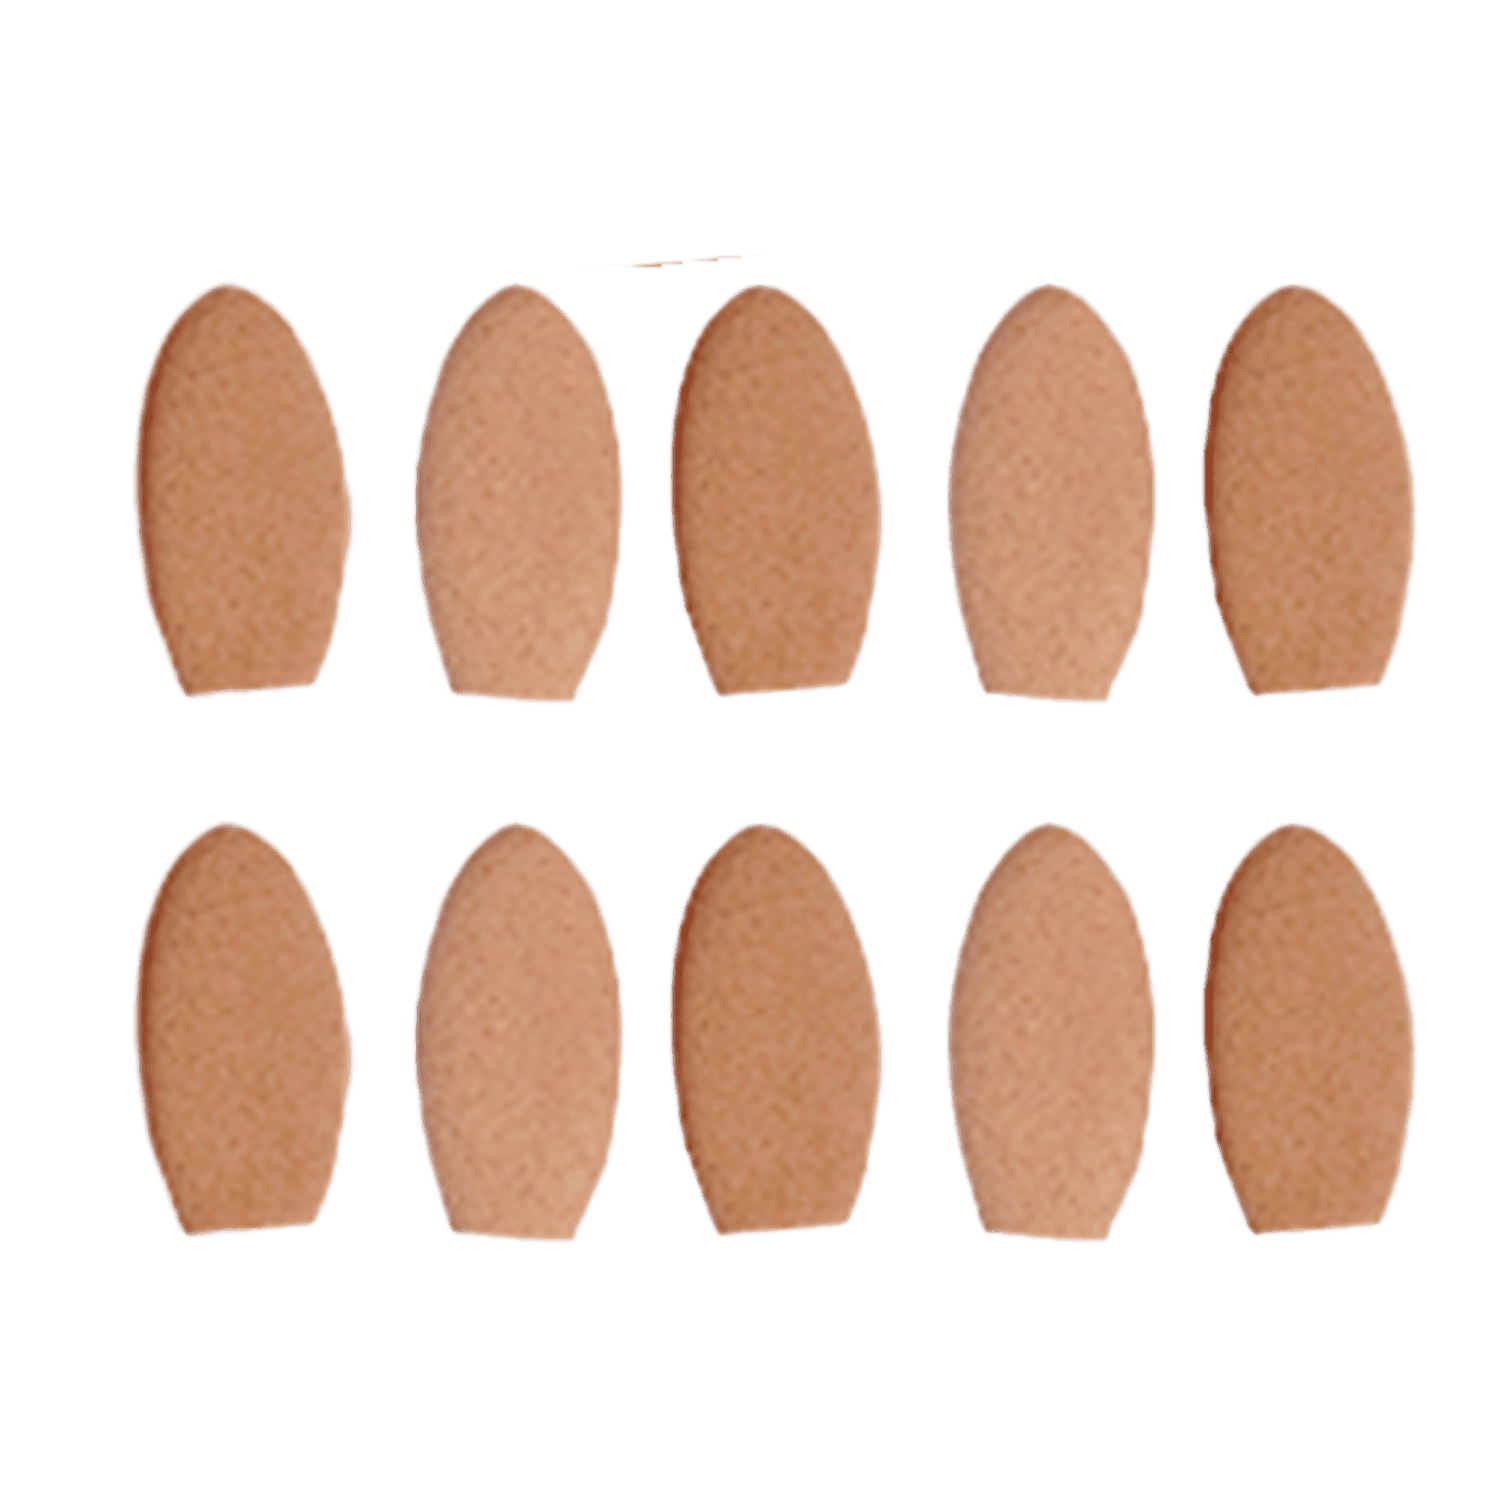 Sofft Applicators - Assortment Replacement Covers - Matuska Taxidermy Supply Company